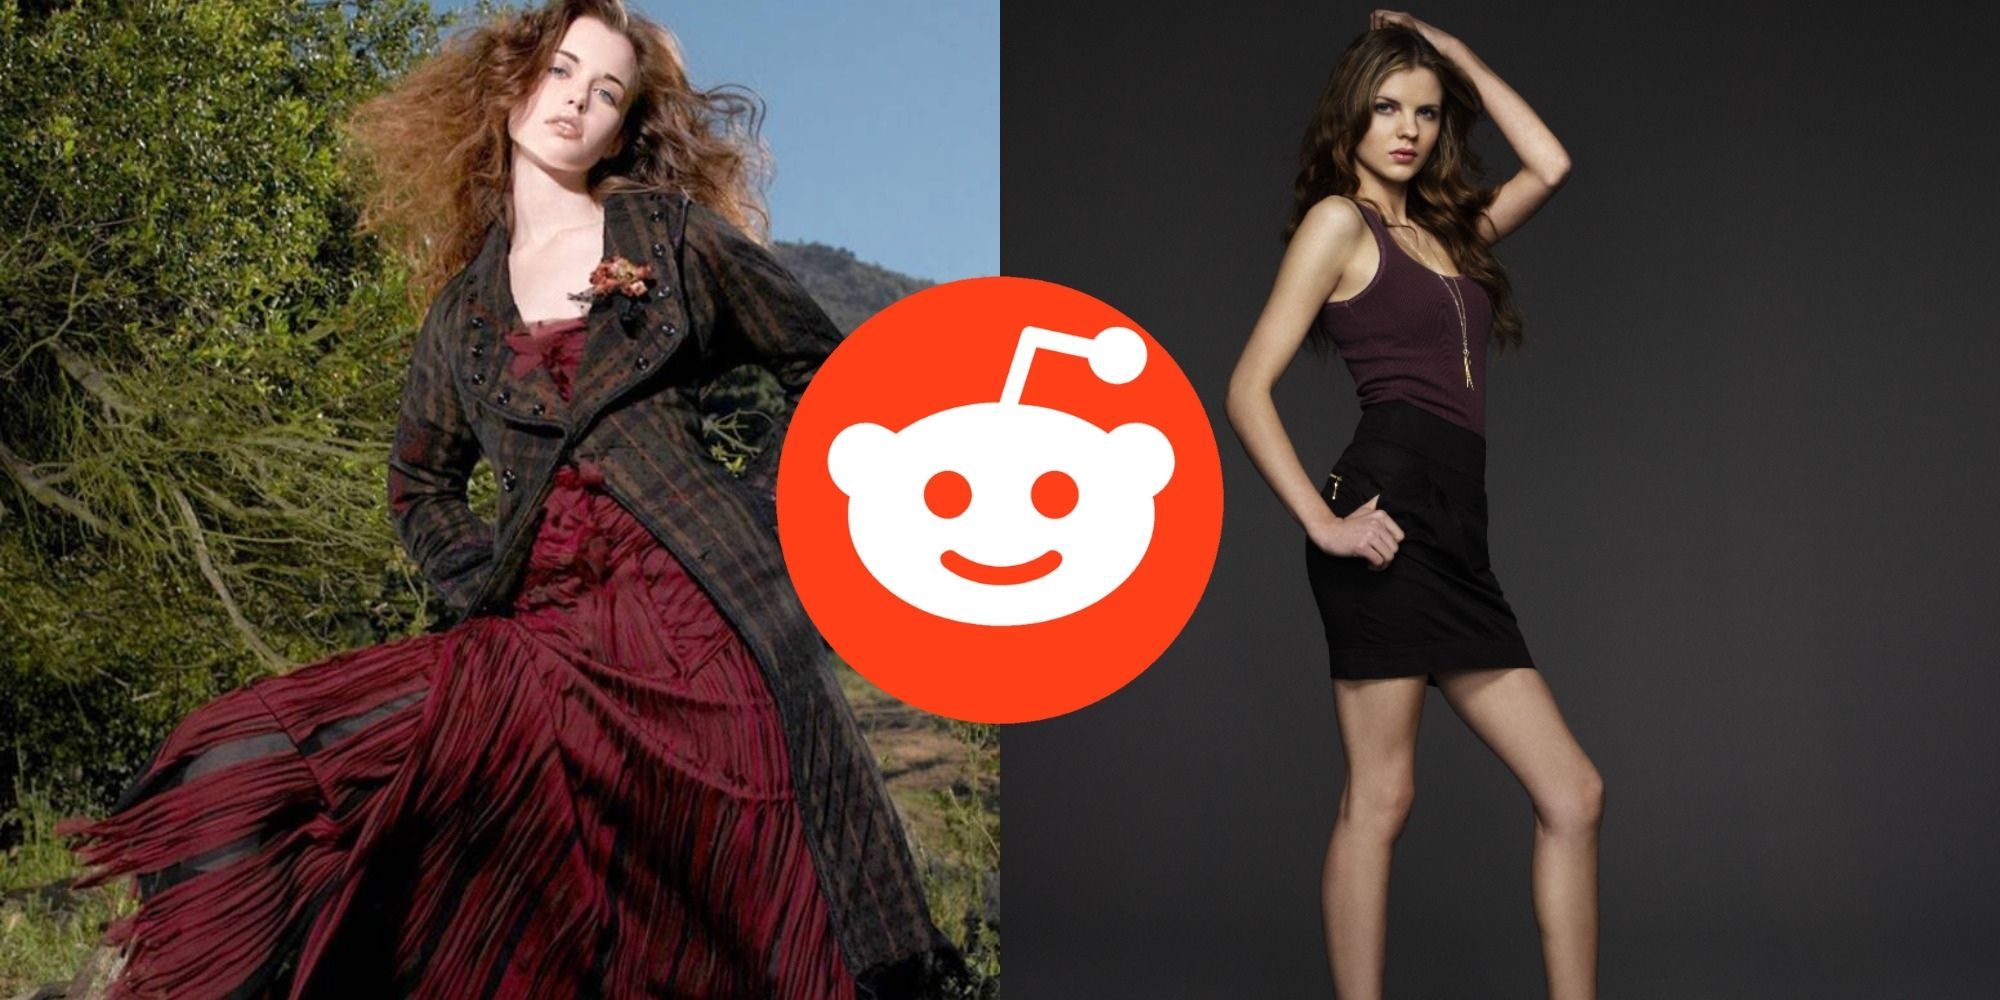 America’s Next Top Model The 10 Most Unfair Eliminations According To Reddit